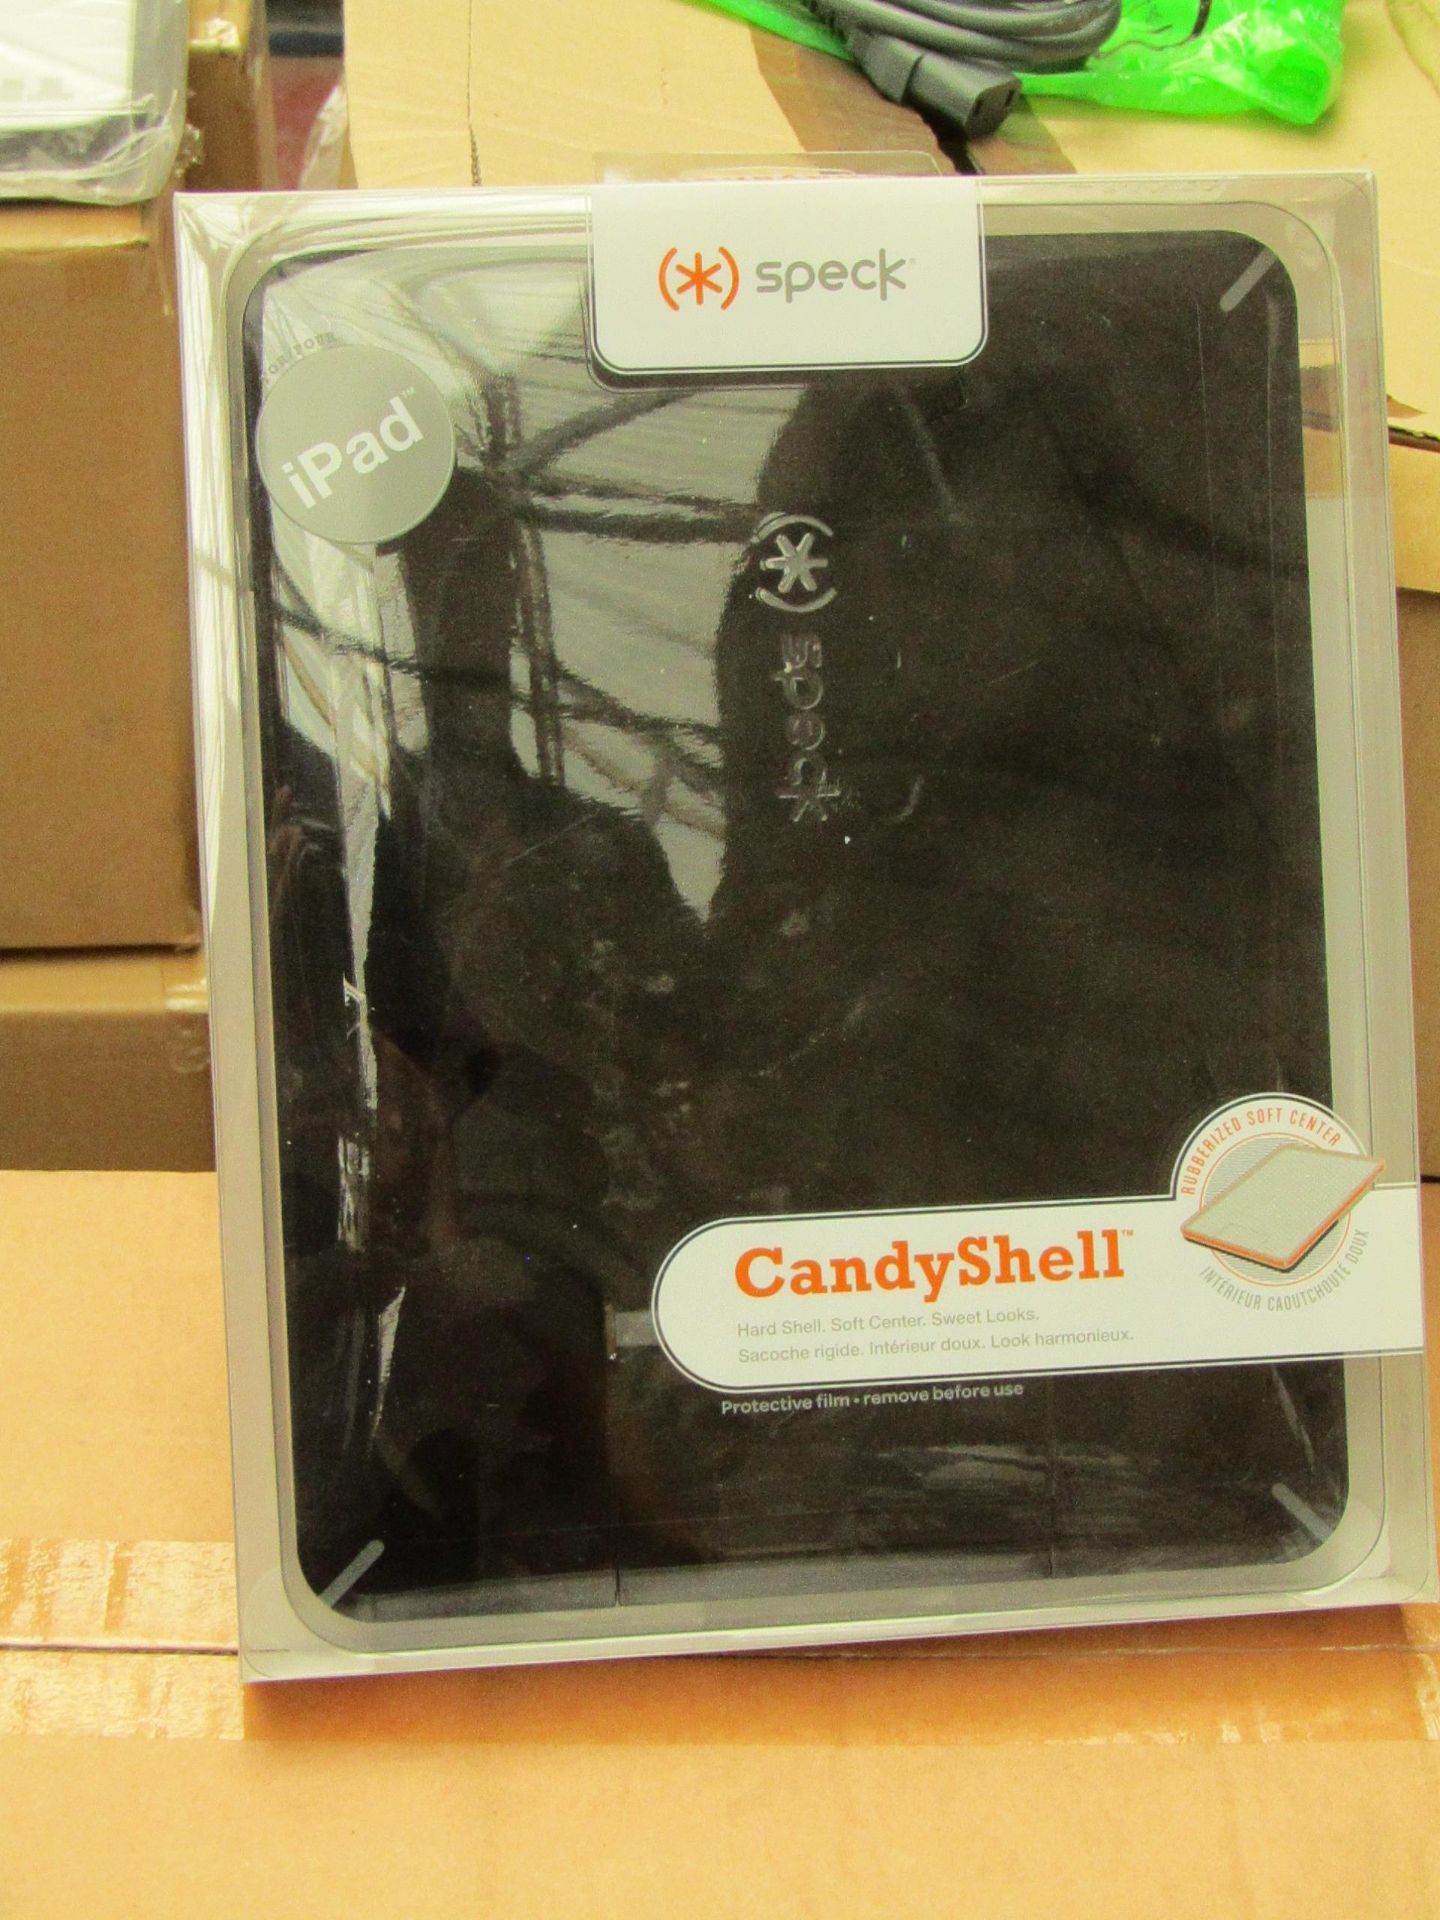 5x Speck candy shell hard shell case for the iPad. All new in packaging.